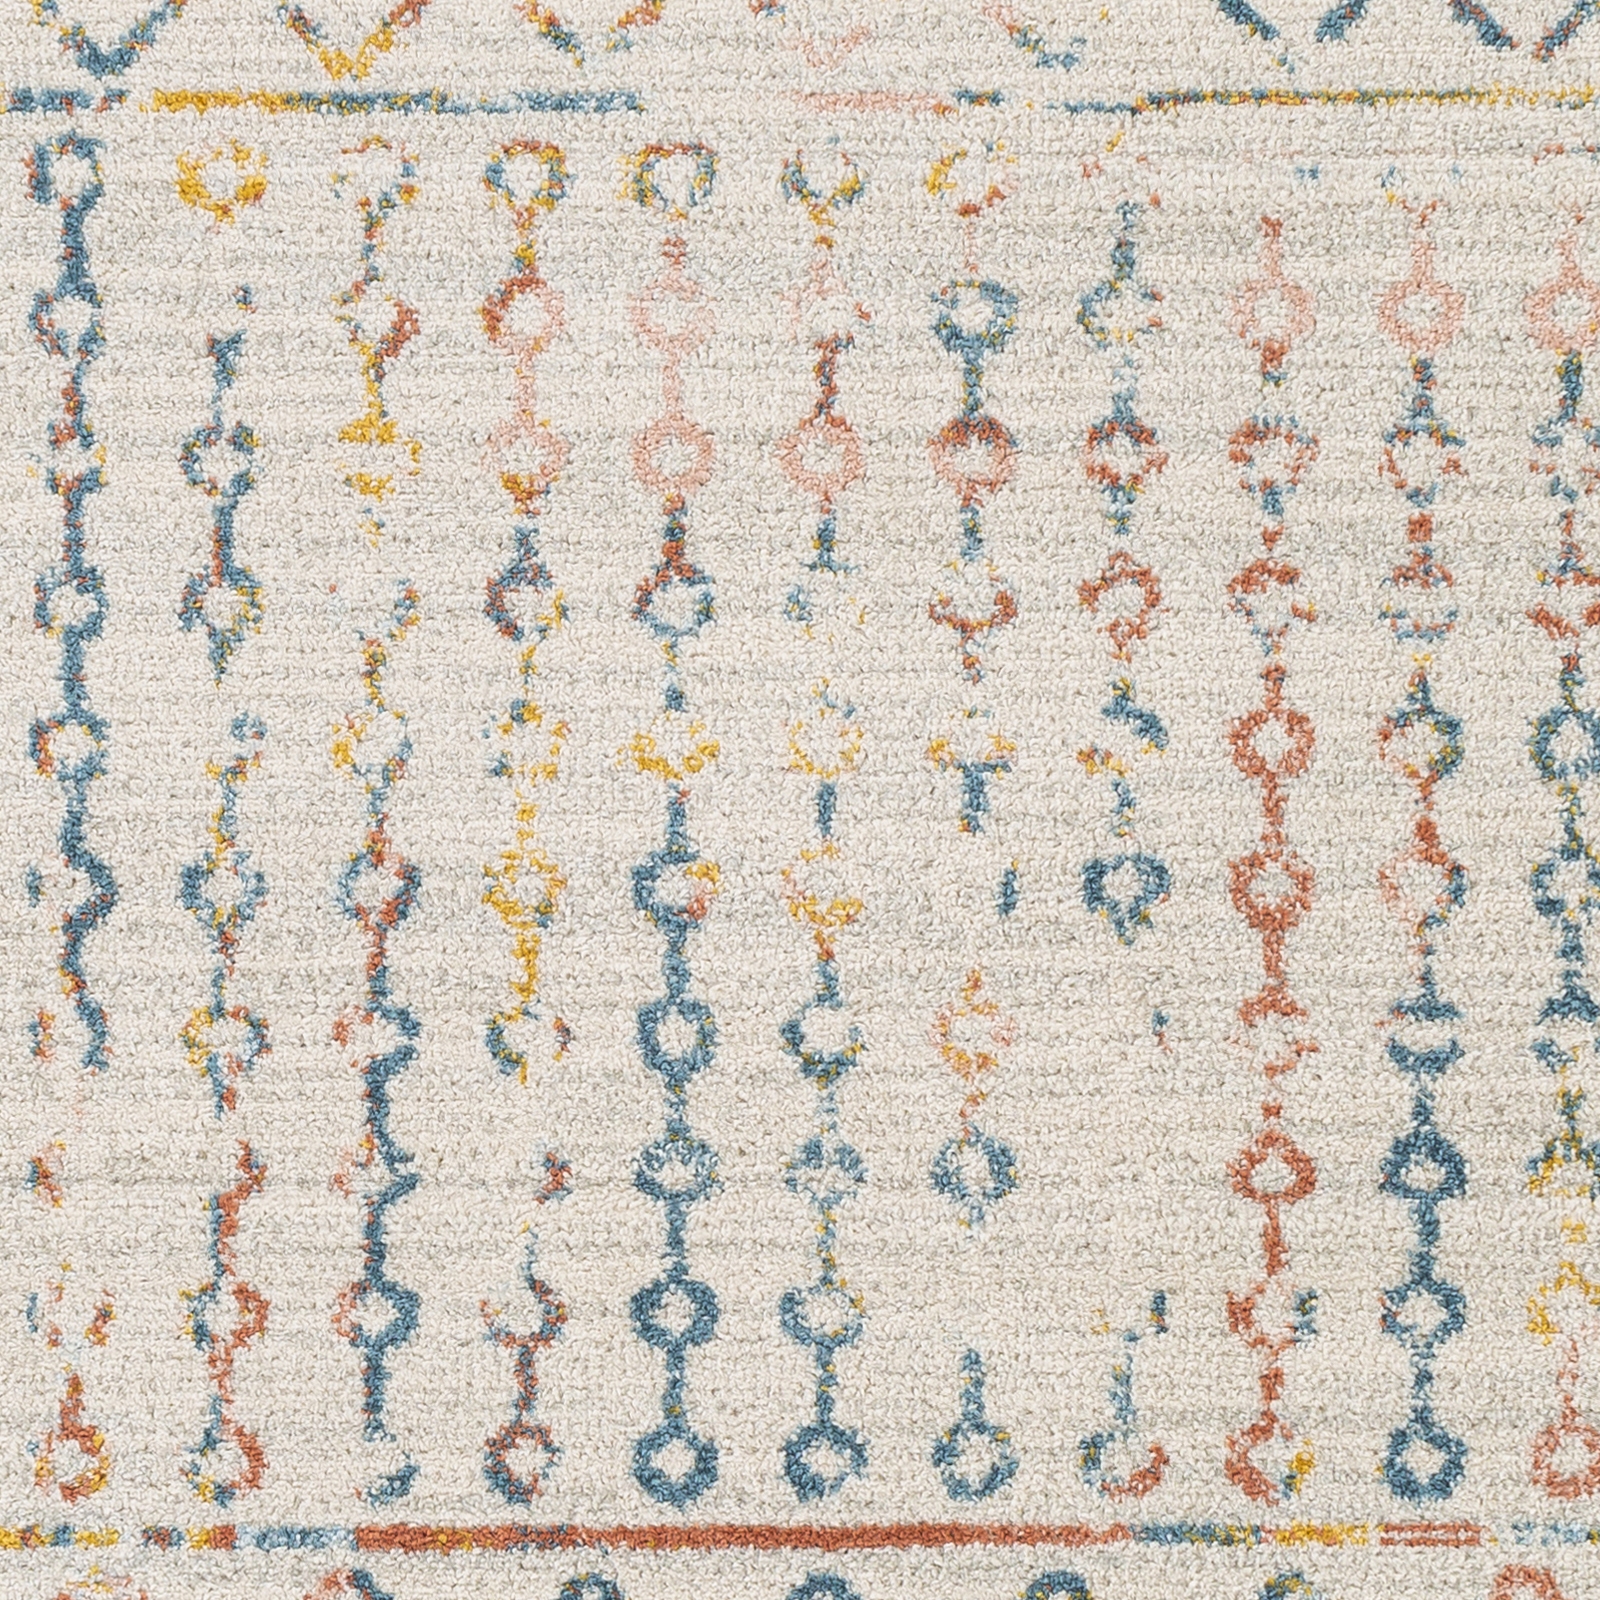 Chester Rug, 7'10" x 10'3" - Image 5